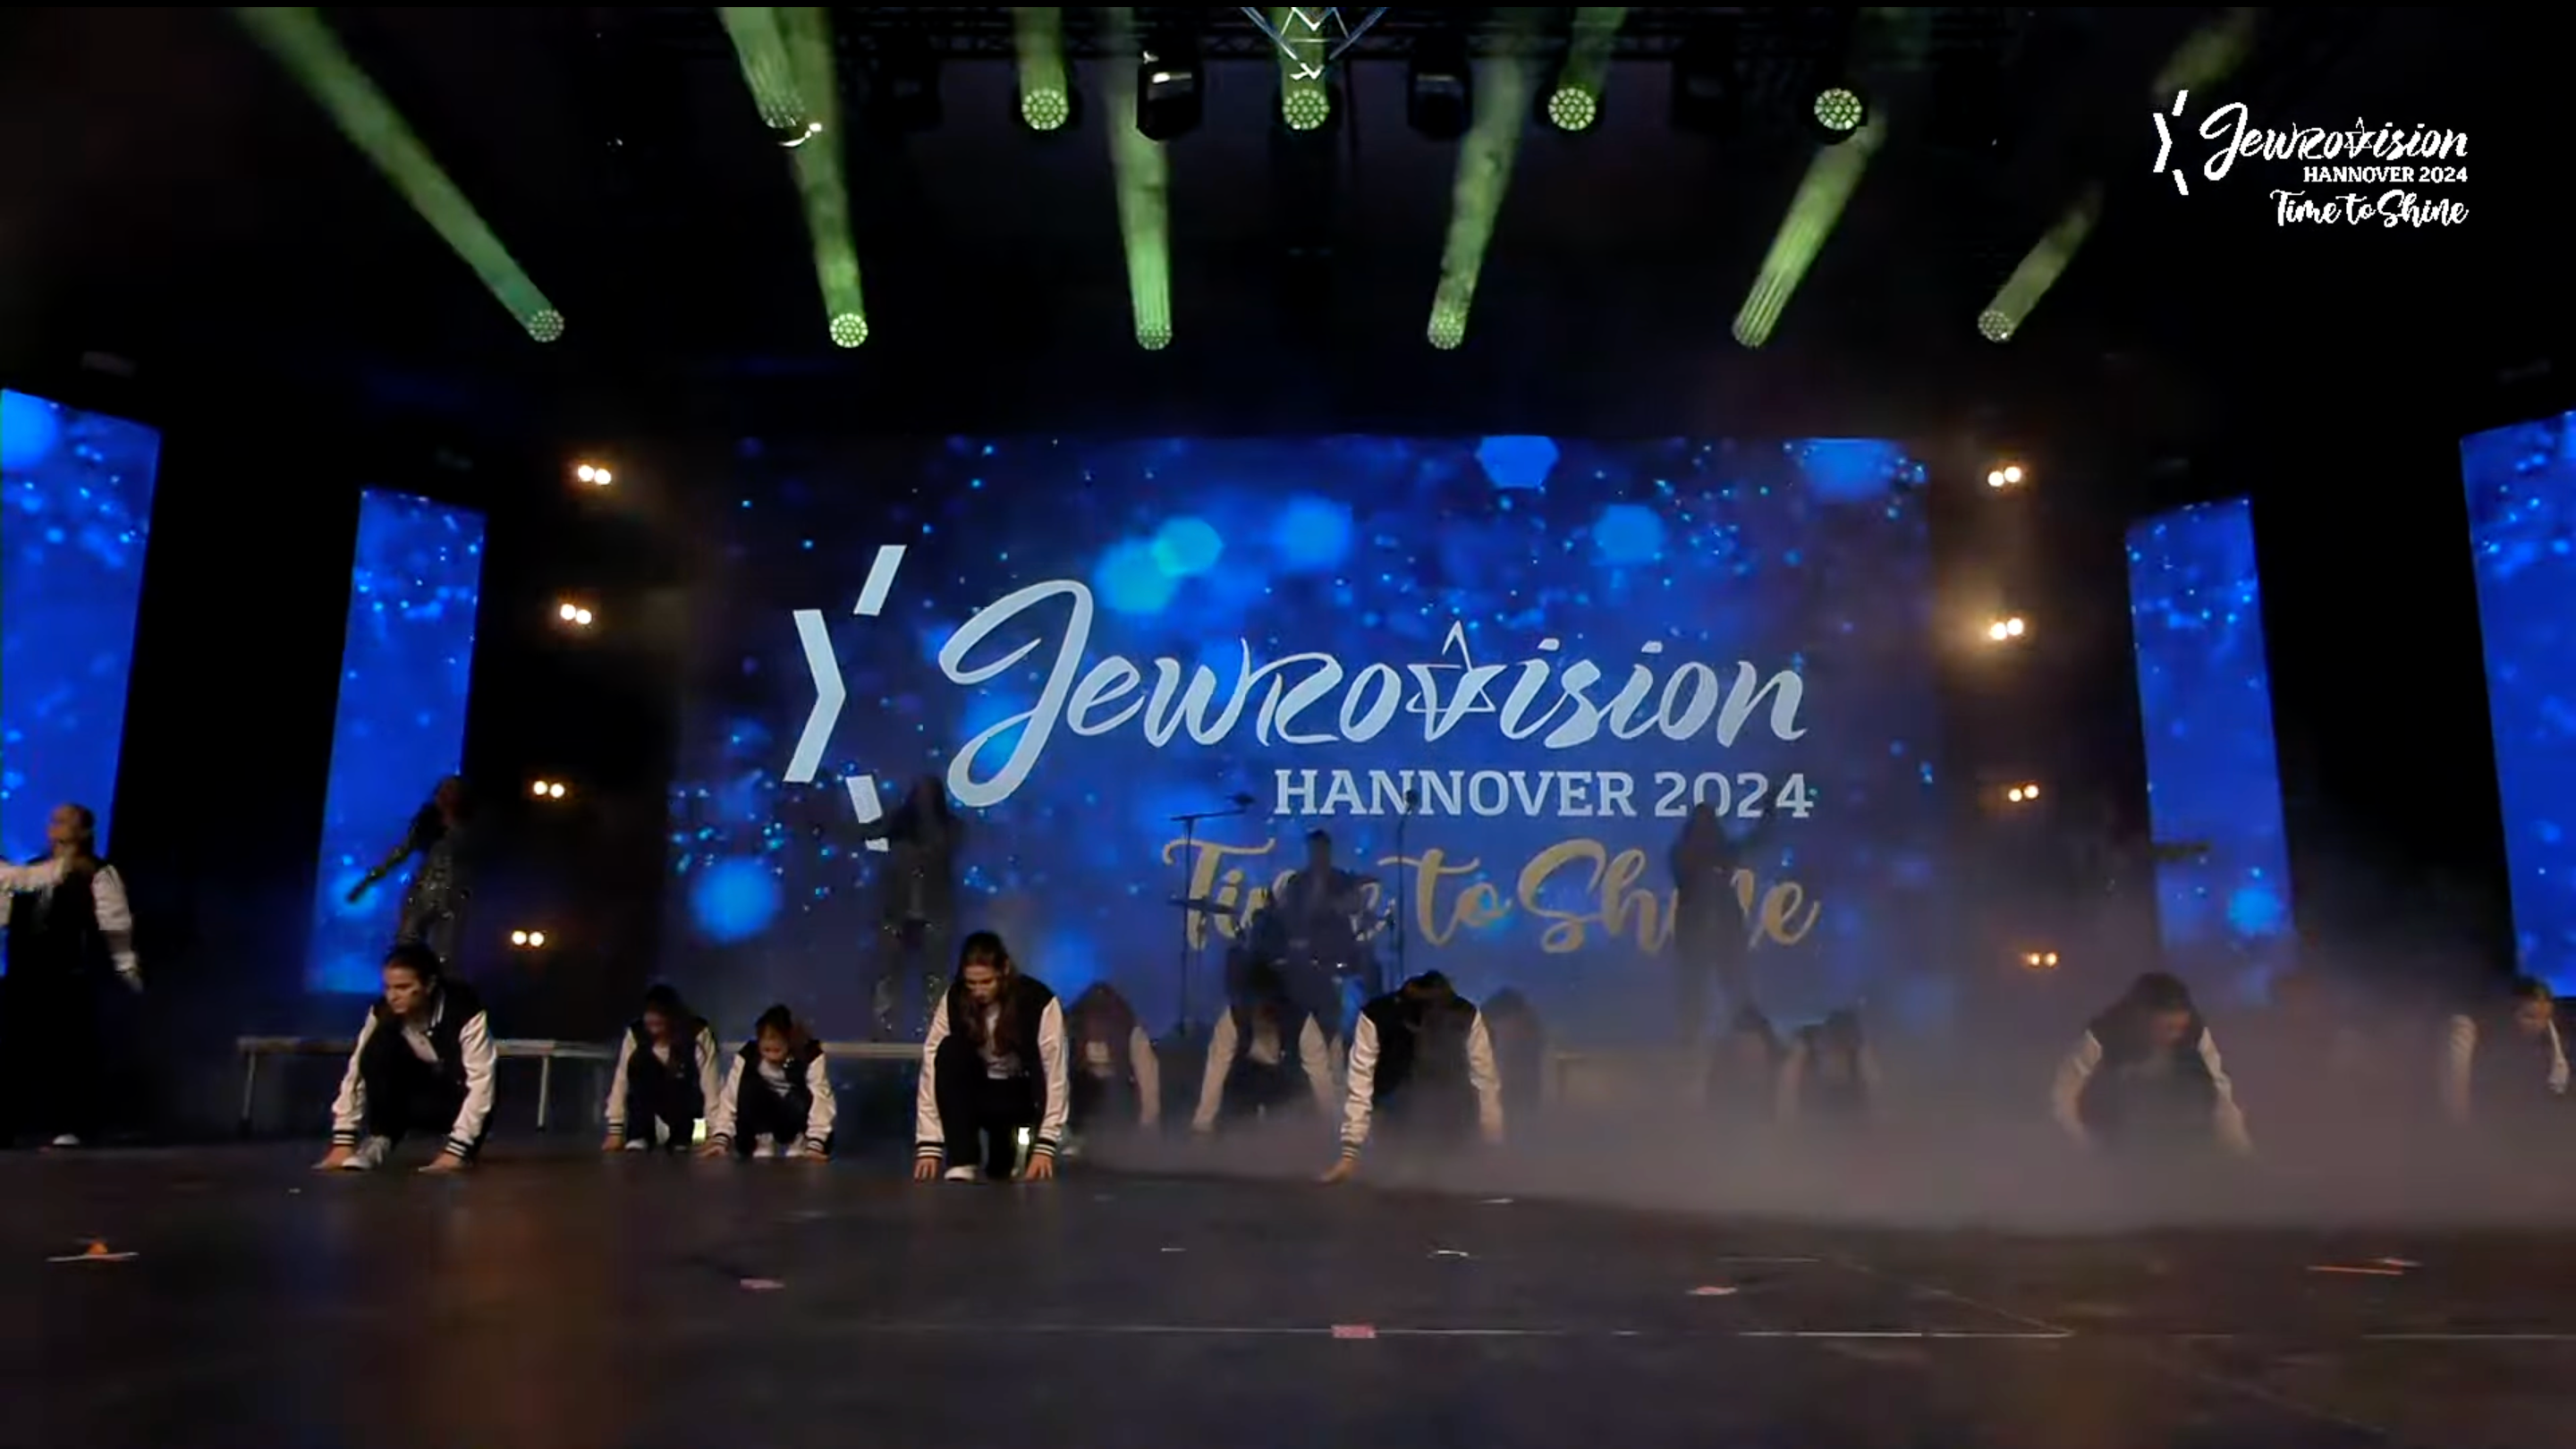 Before Eden Golan sang at Eurovision, Jewish teens from across Germany performed at Jewrovision